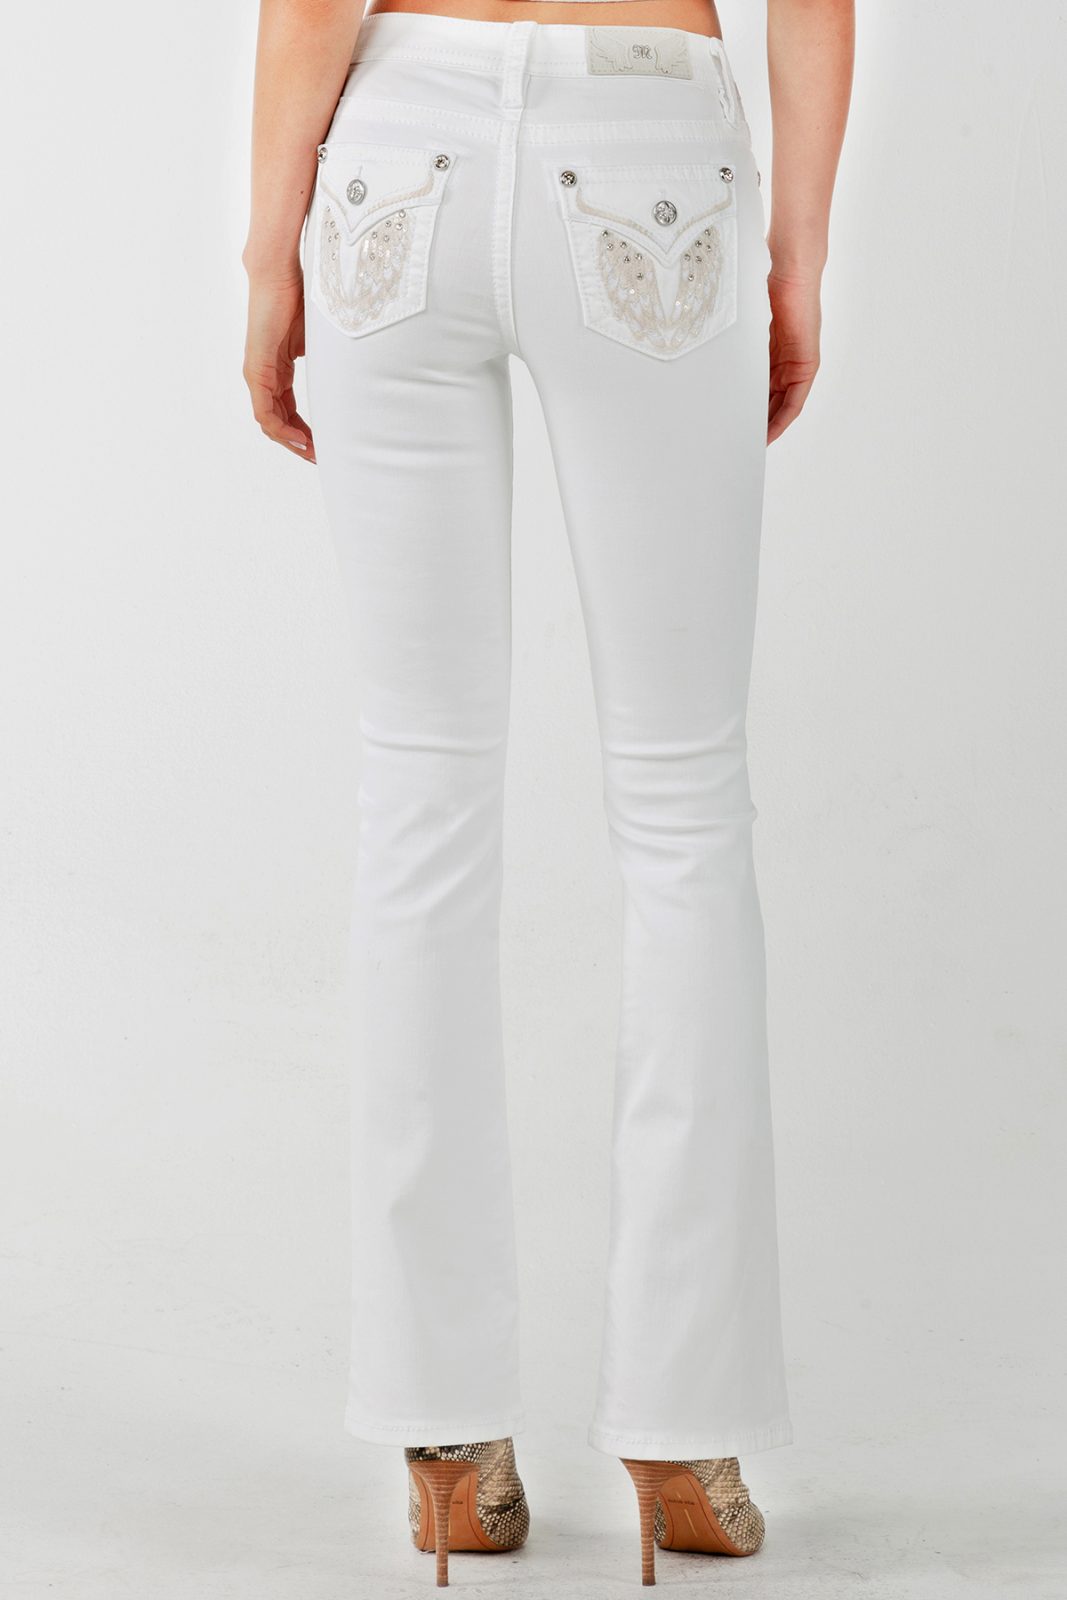 Miss Me White Blinged Winged Mid Rise Bootcut Jean